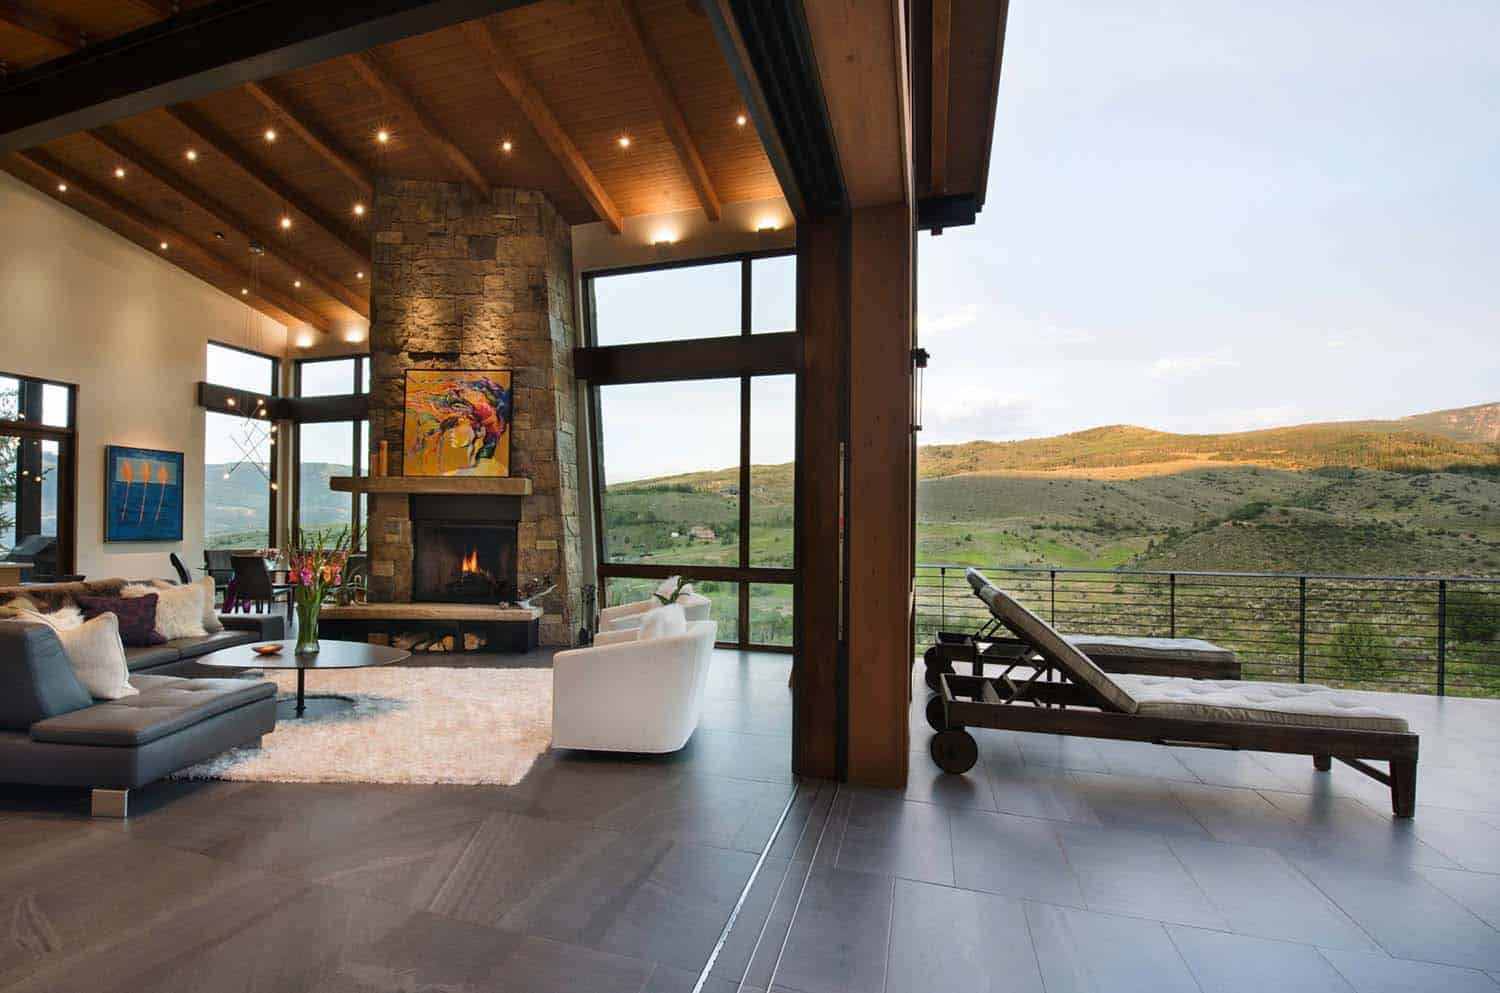 Contemporary Mountain Home Renovation-Berglund Architects-01-1 Kindesign